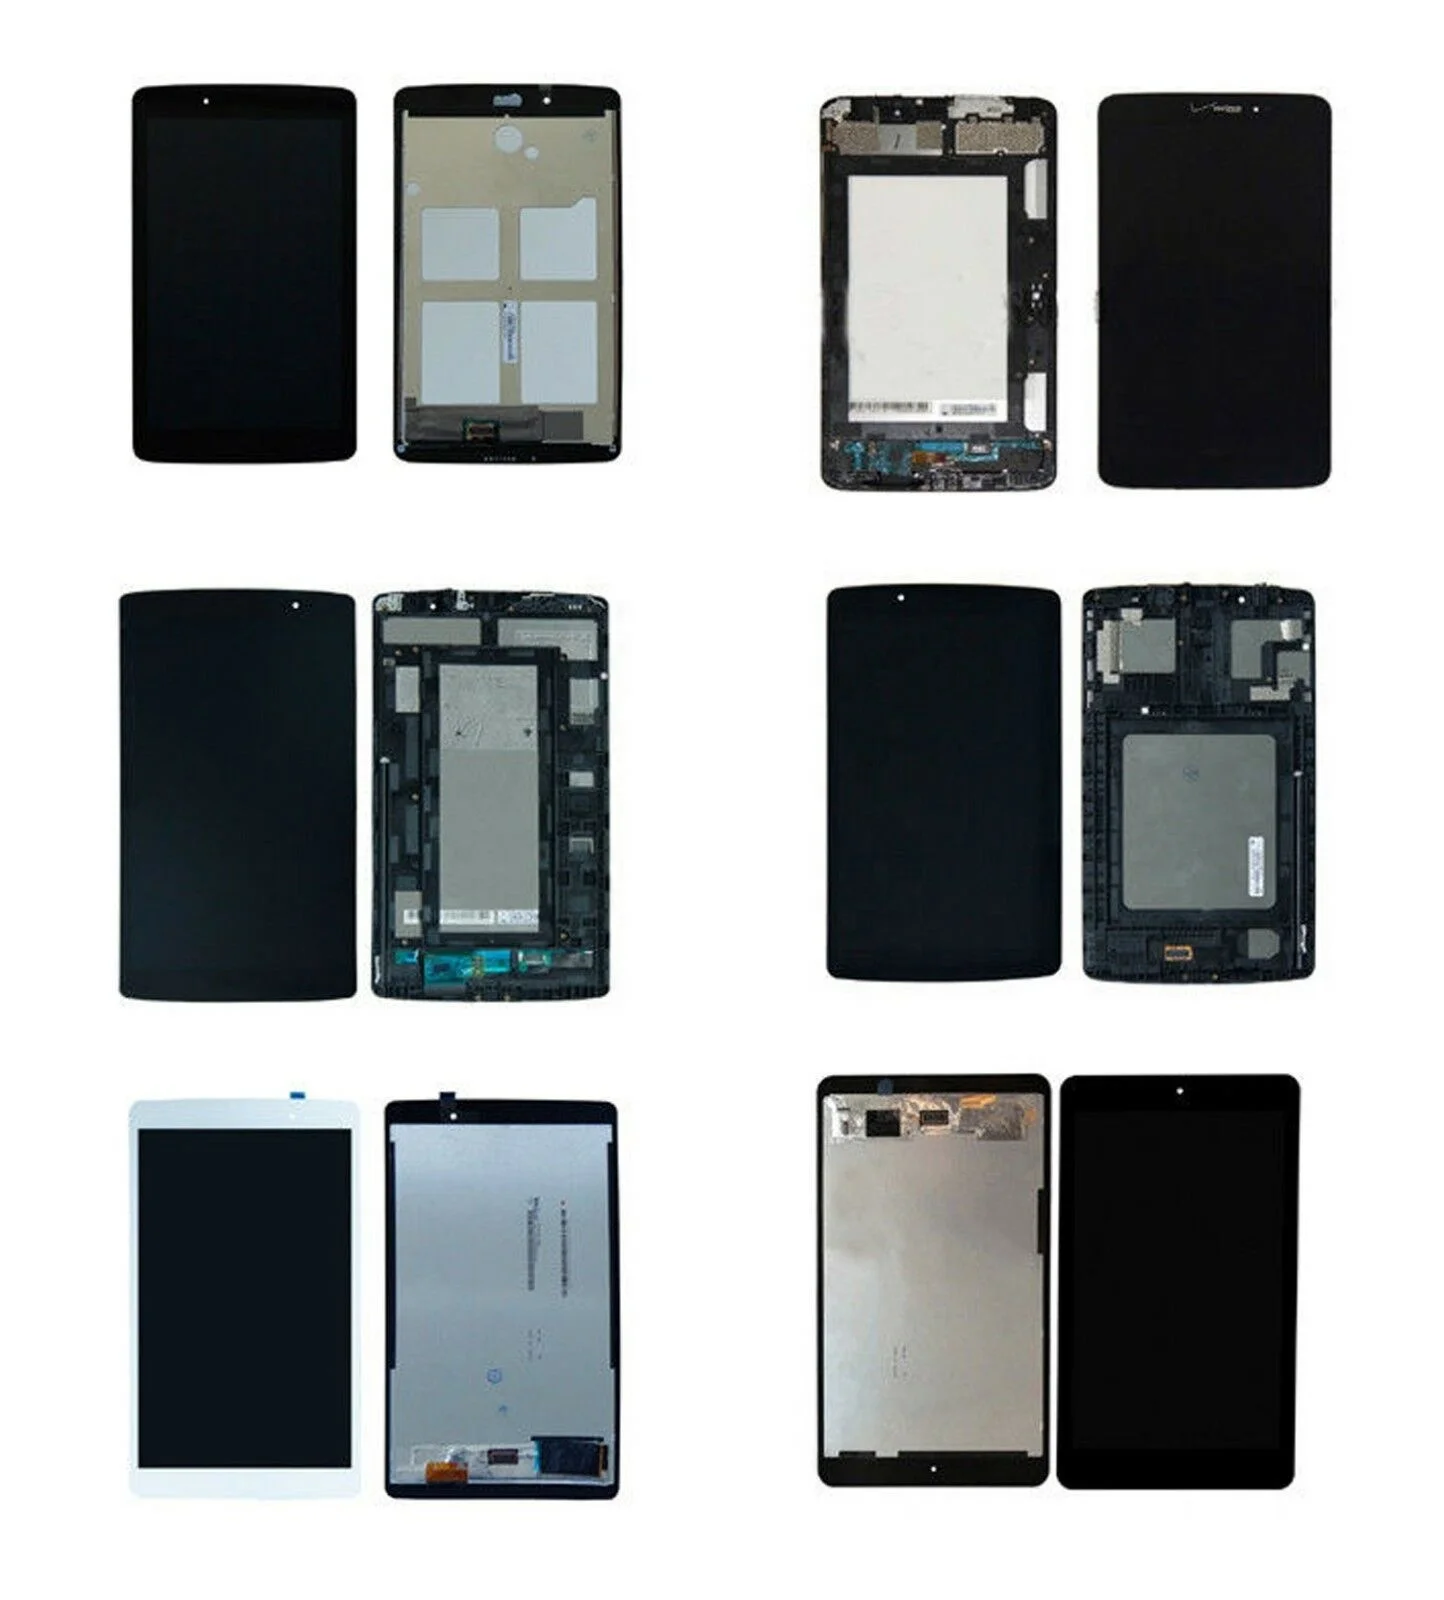 

Tablet Lcds For LG G Pad V400 LK430 V530 V521 VK815 V495 LCD Display Touch Screen Digitizer ASSEMBLY, Black